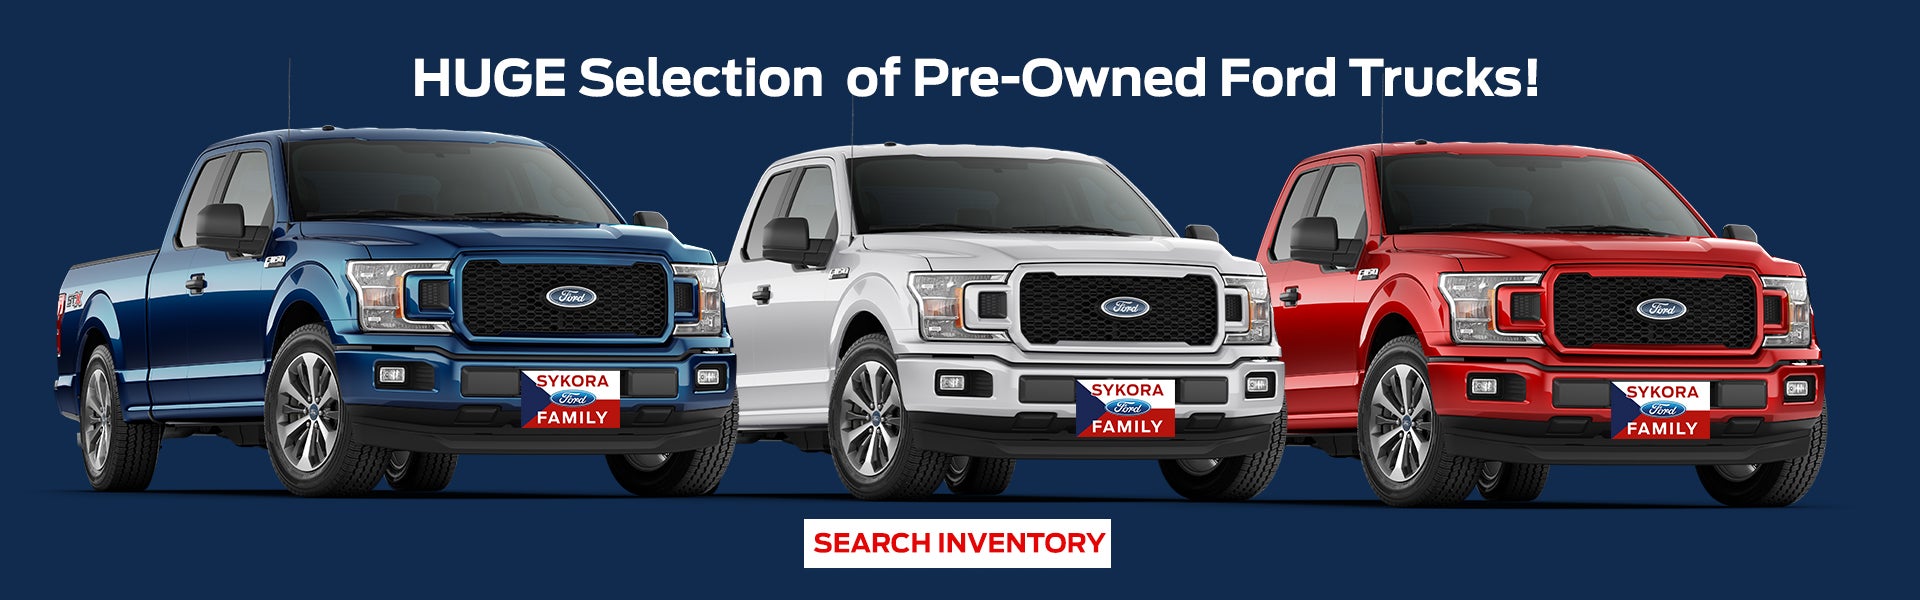 Pre-Owned Ford Trucks